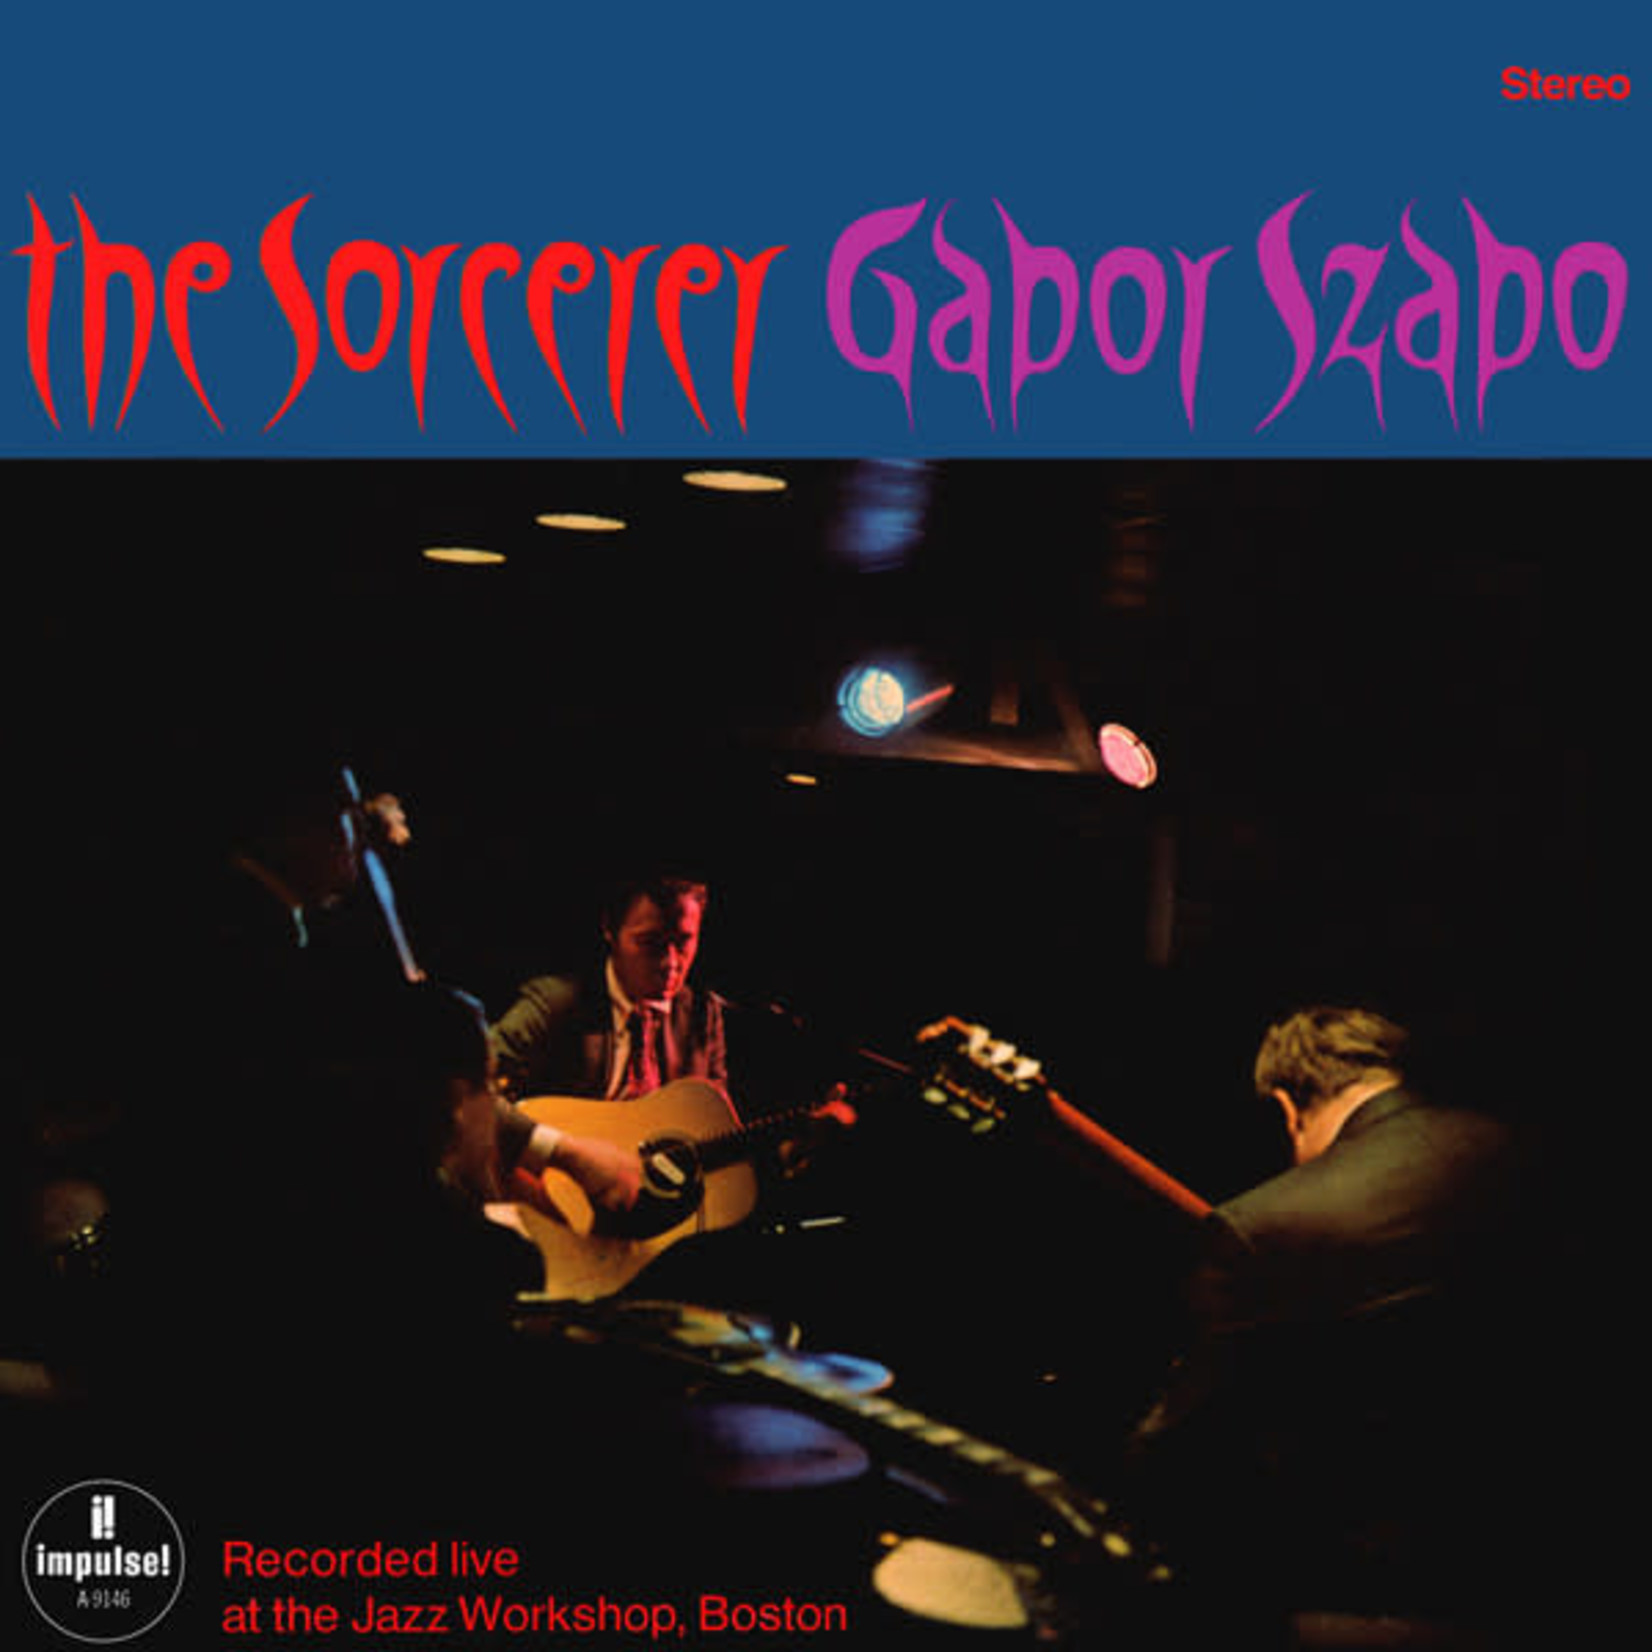 [New] Gabor Szabo - The Sorcerer (Verve By Request series)